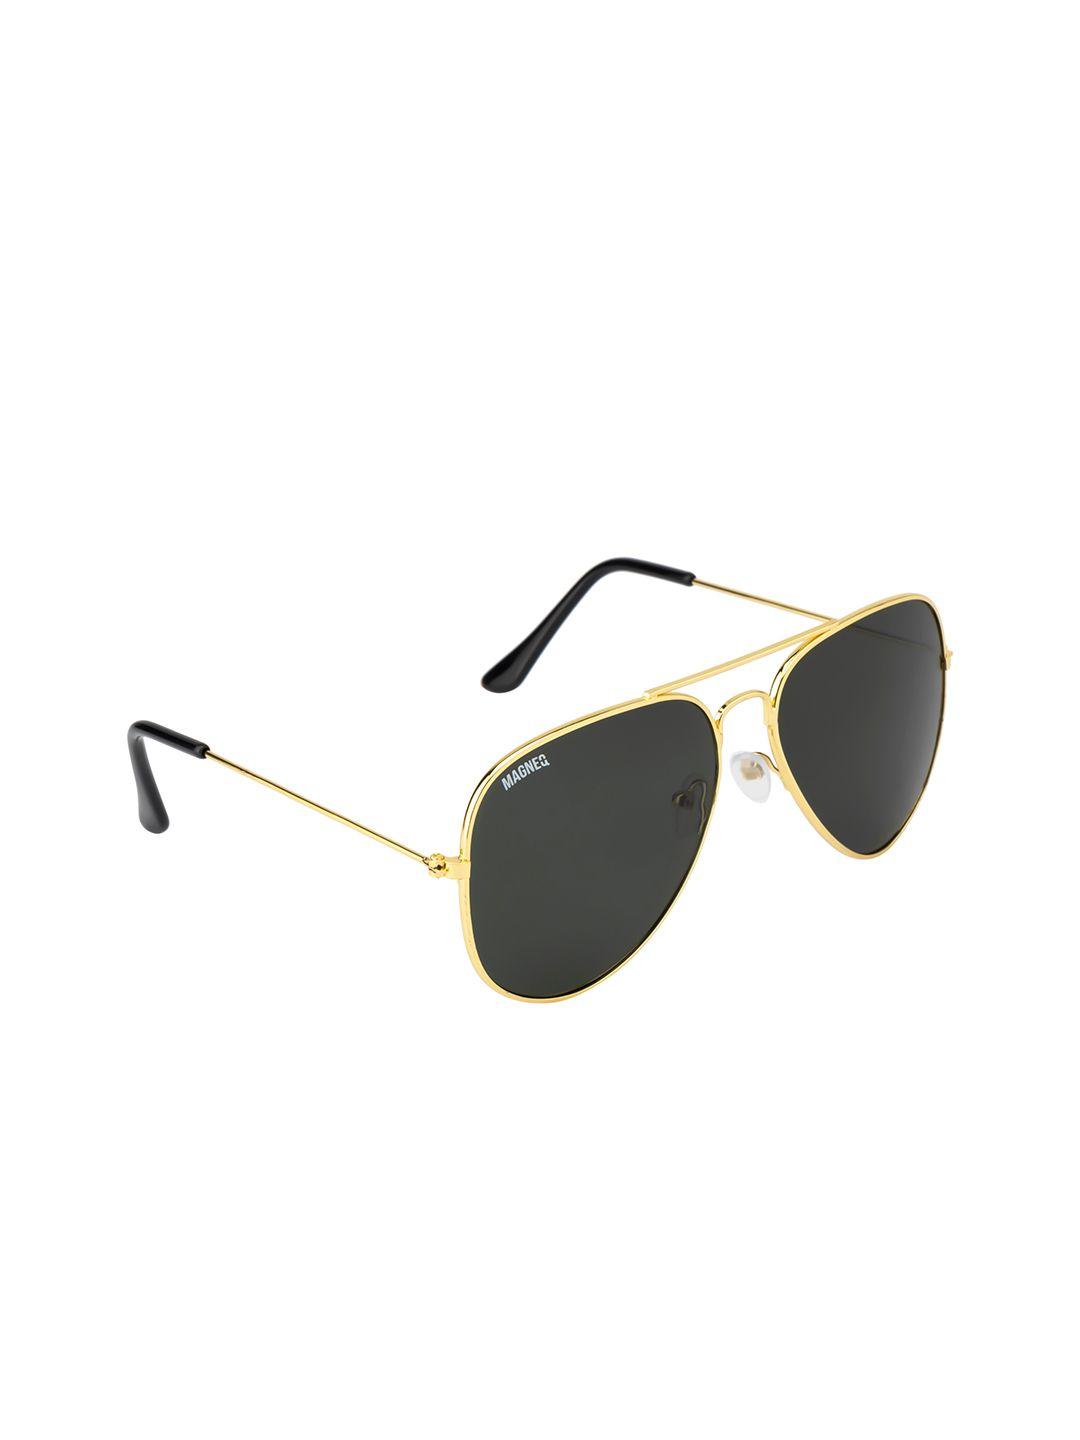 magneq lens & aviator sunglasses with polarised & uv protected lens mg 8778/s c2 5518